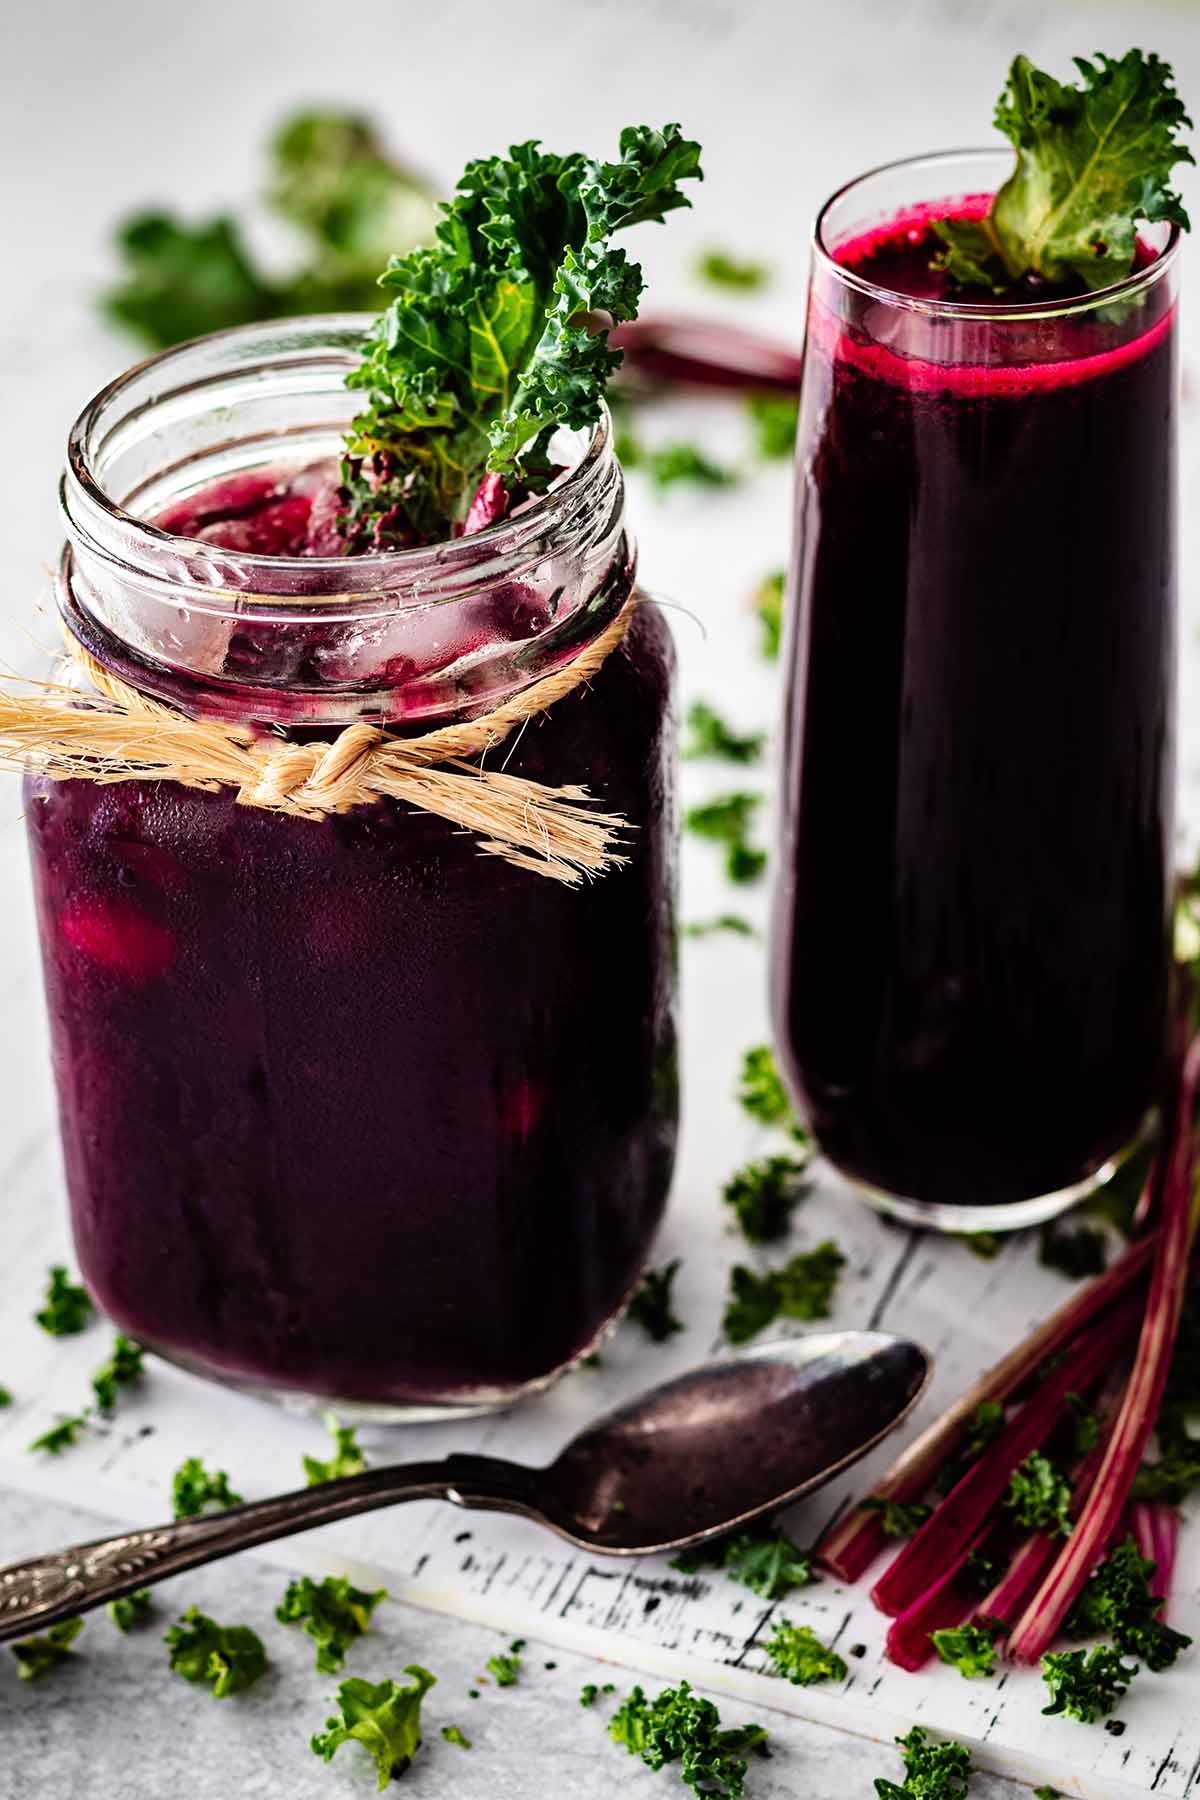 Close up of glass mug and tall glass filled with beet green juice garnished with kale.